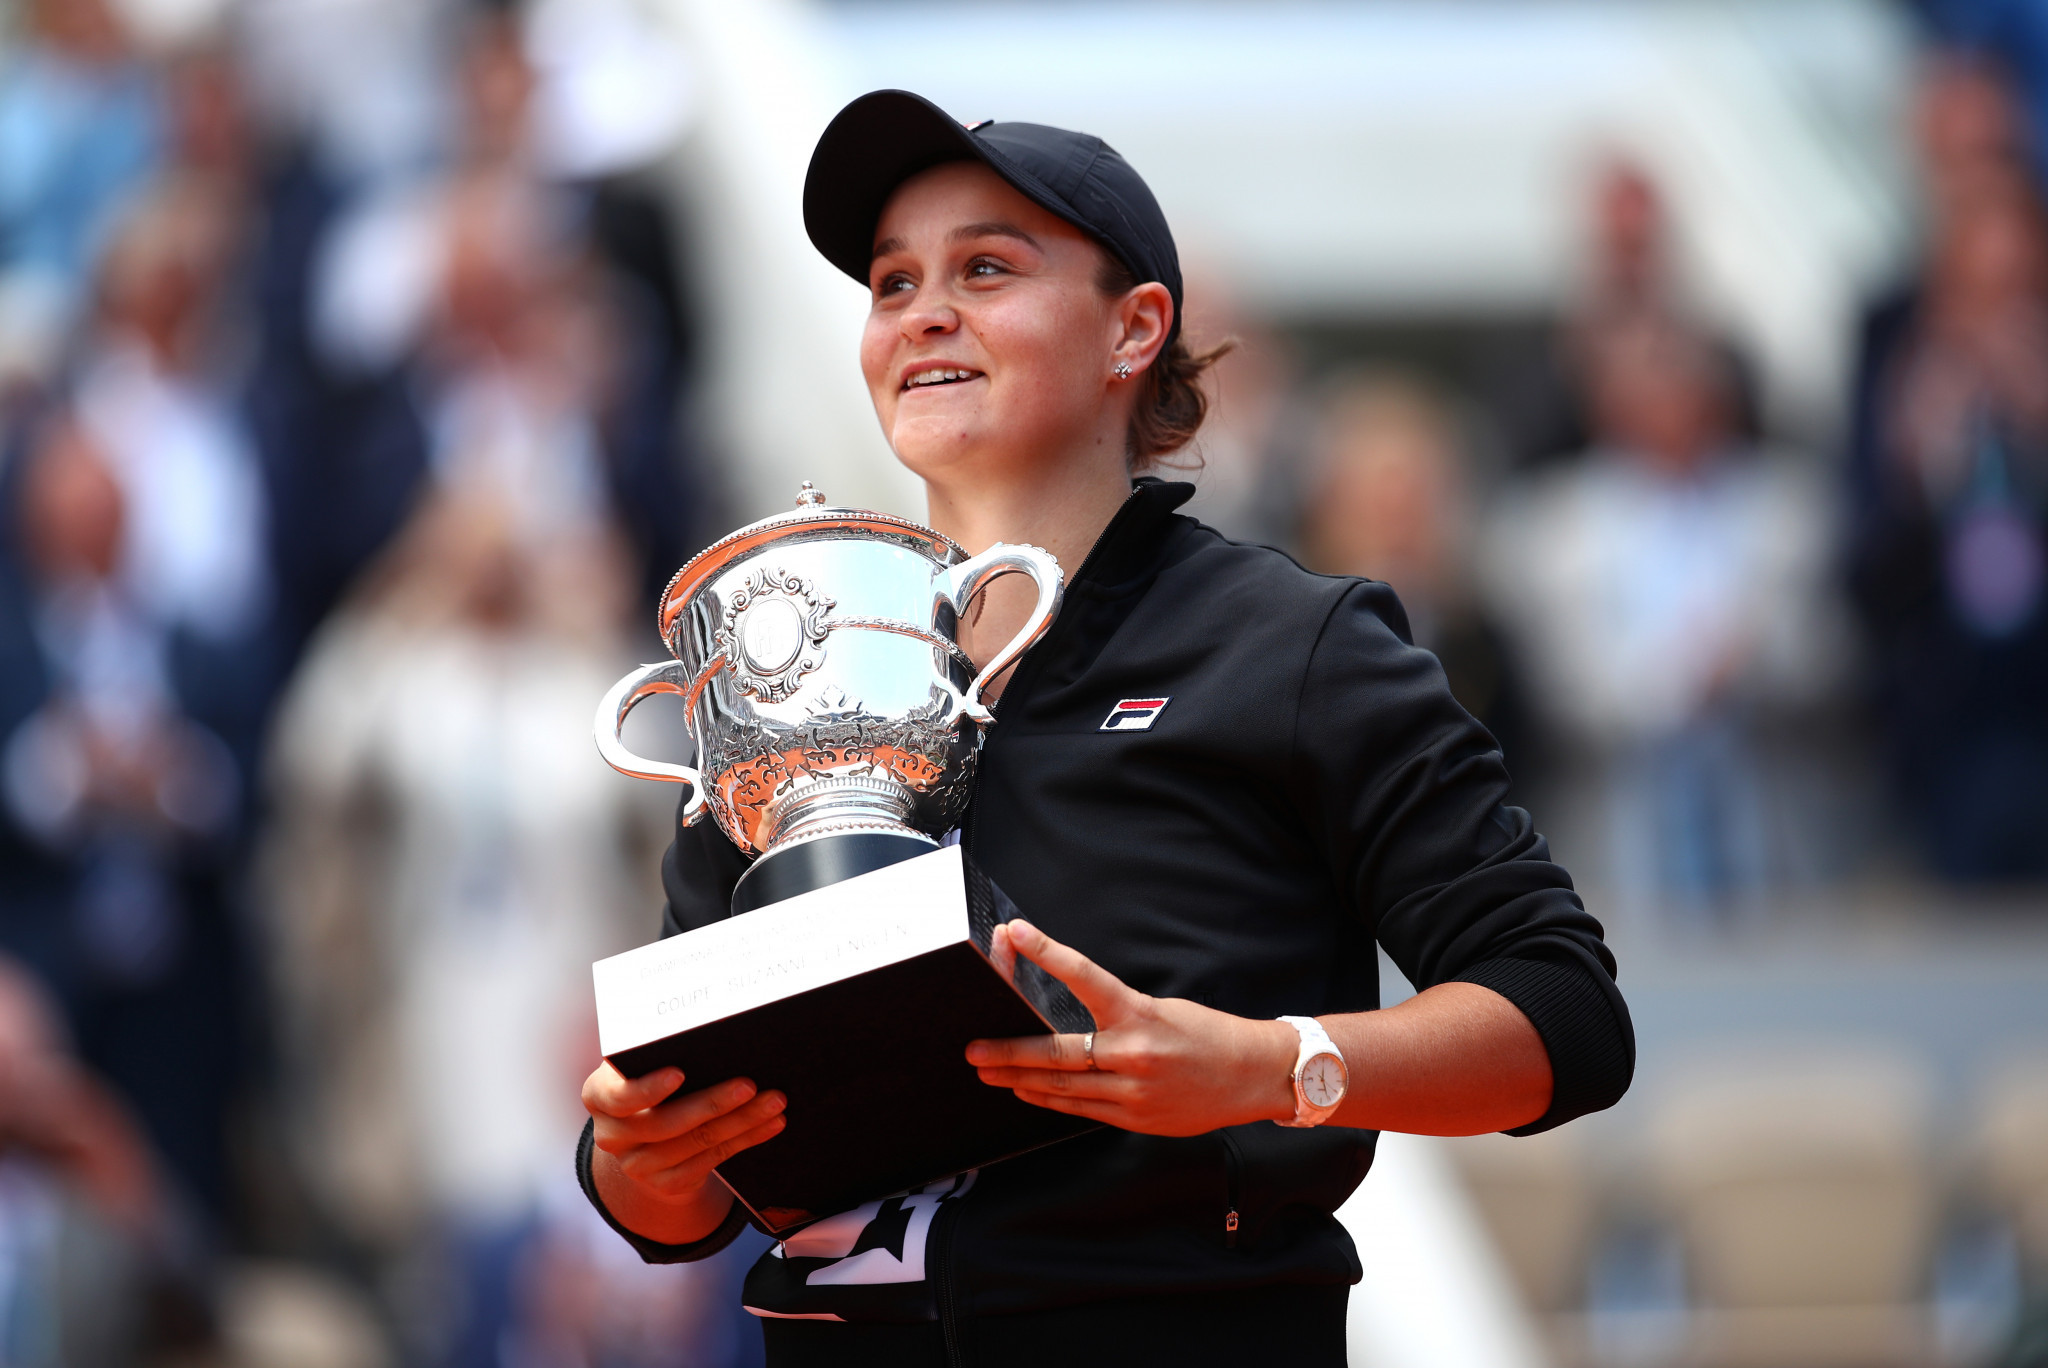 Ashleigh Barty has decided not to defend her French Open title due to COVID-19 concerns ©Getty Images